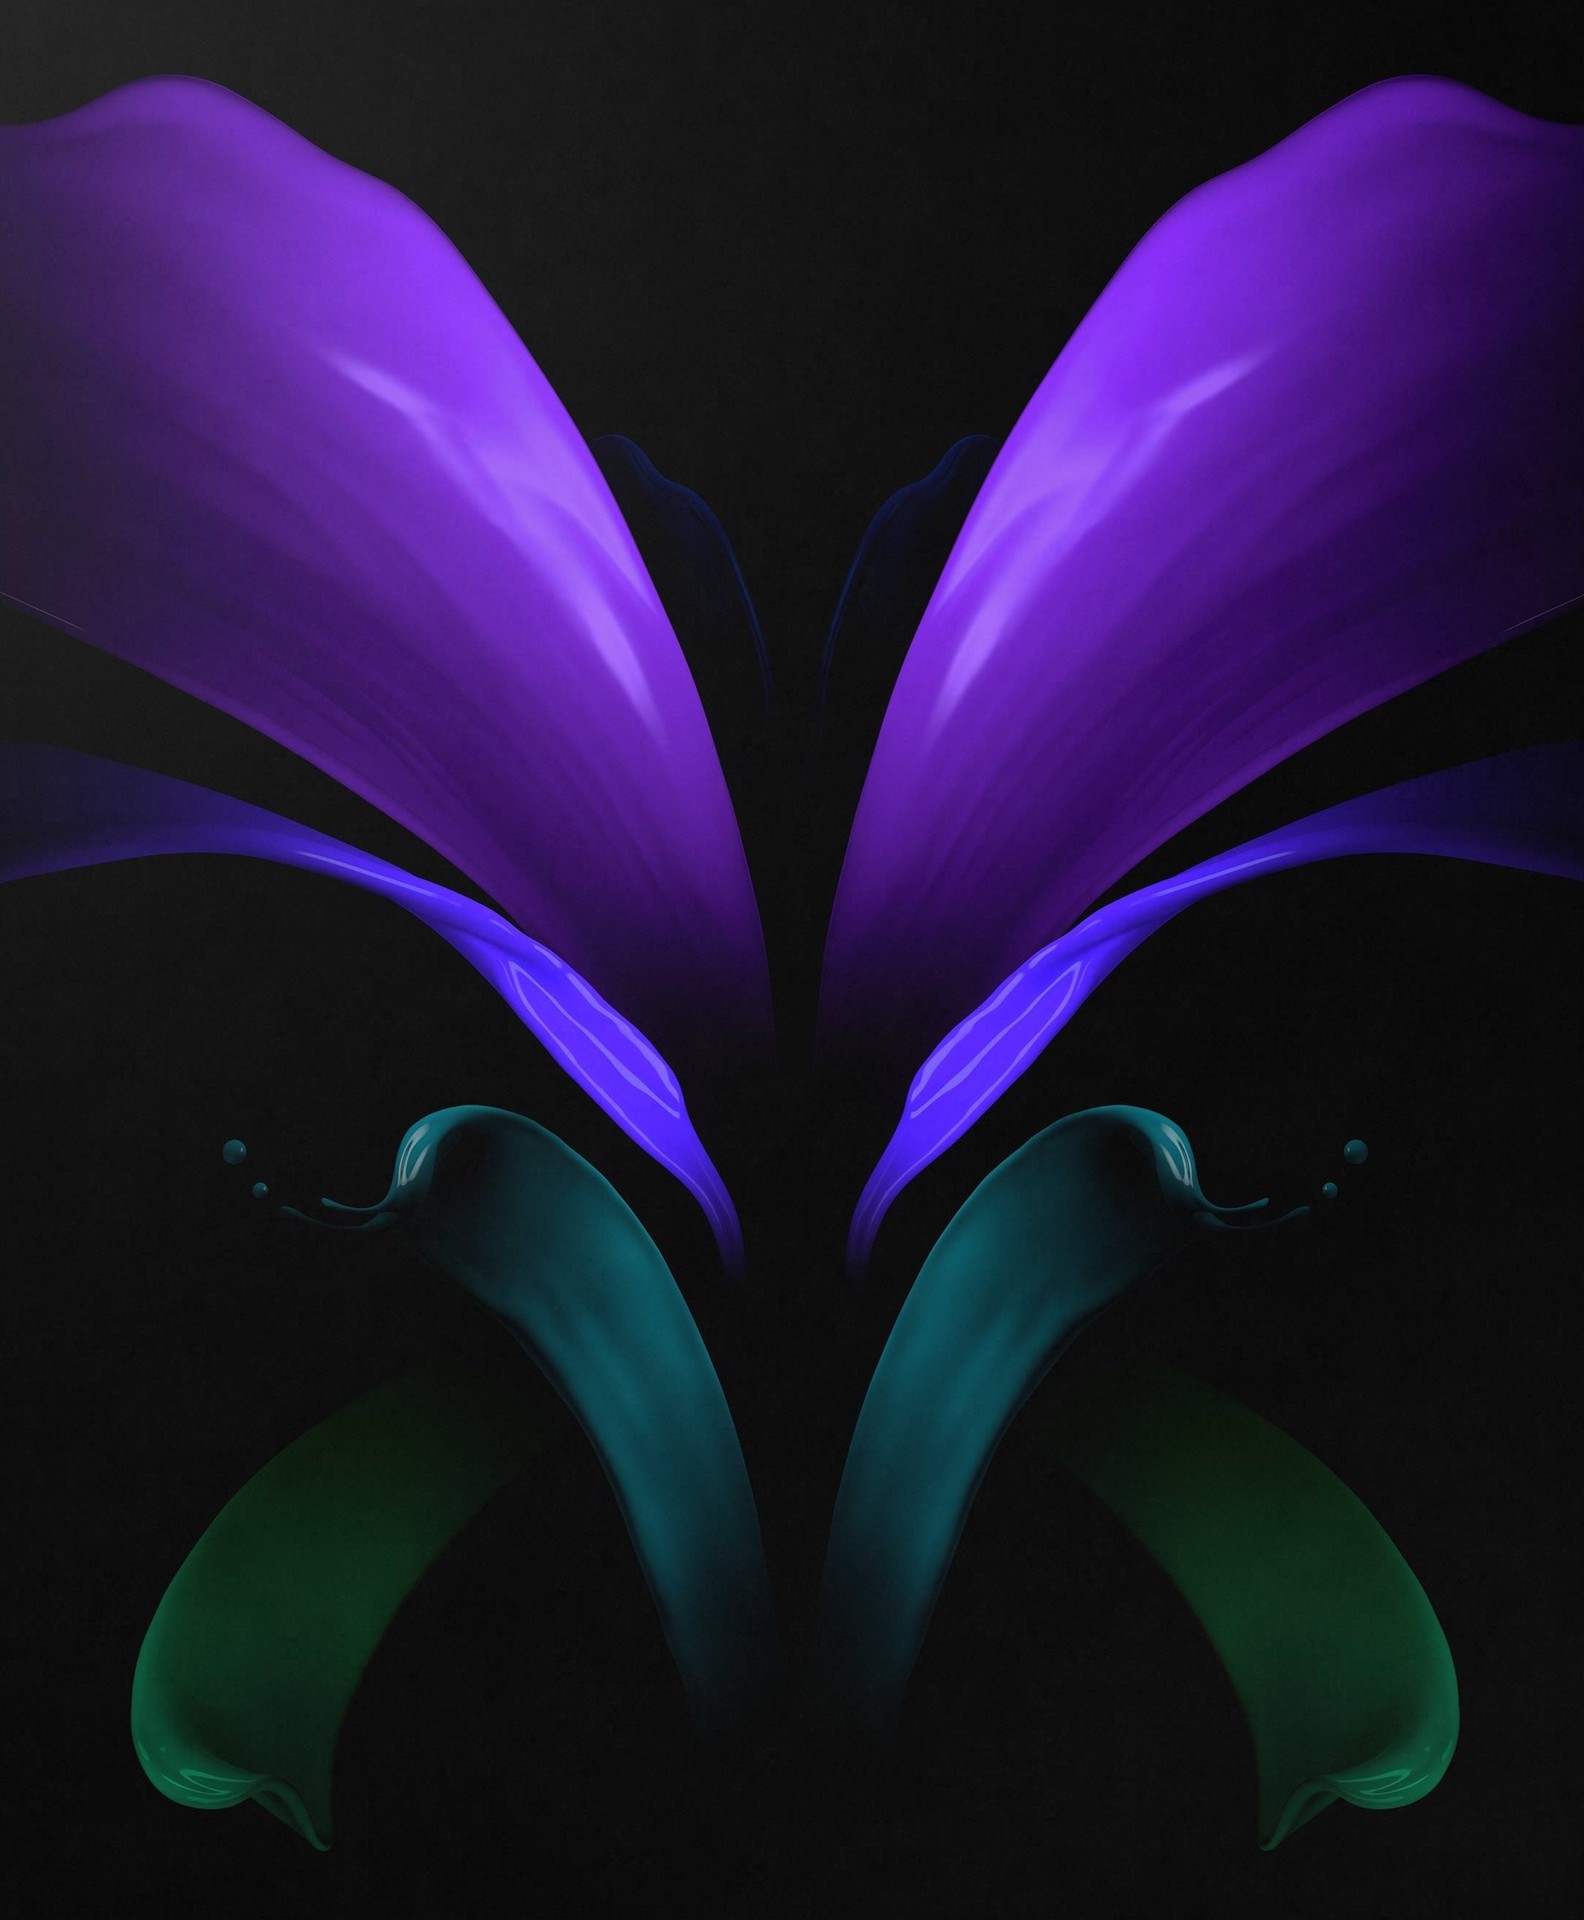 Here Are The Samsung Galaxy Z Fold 2 Wallpapers Android Authority From recent files to images, downloads, and documents just to name a few. samsung galaxy z fold 2 wallpapers